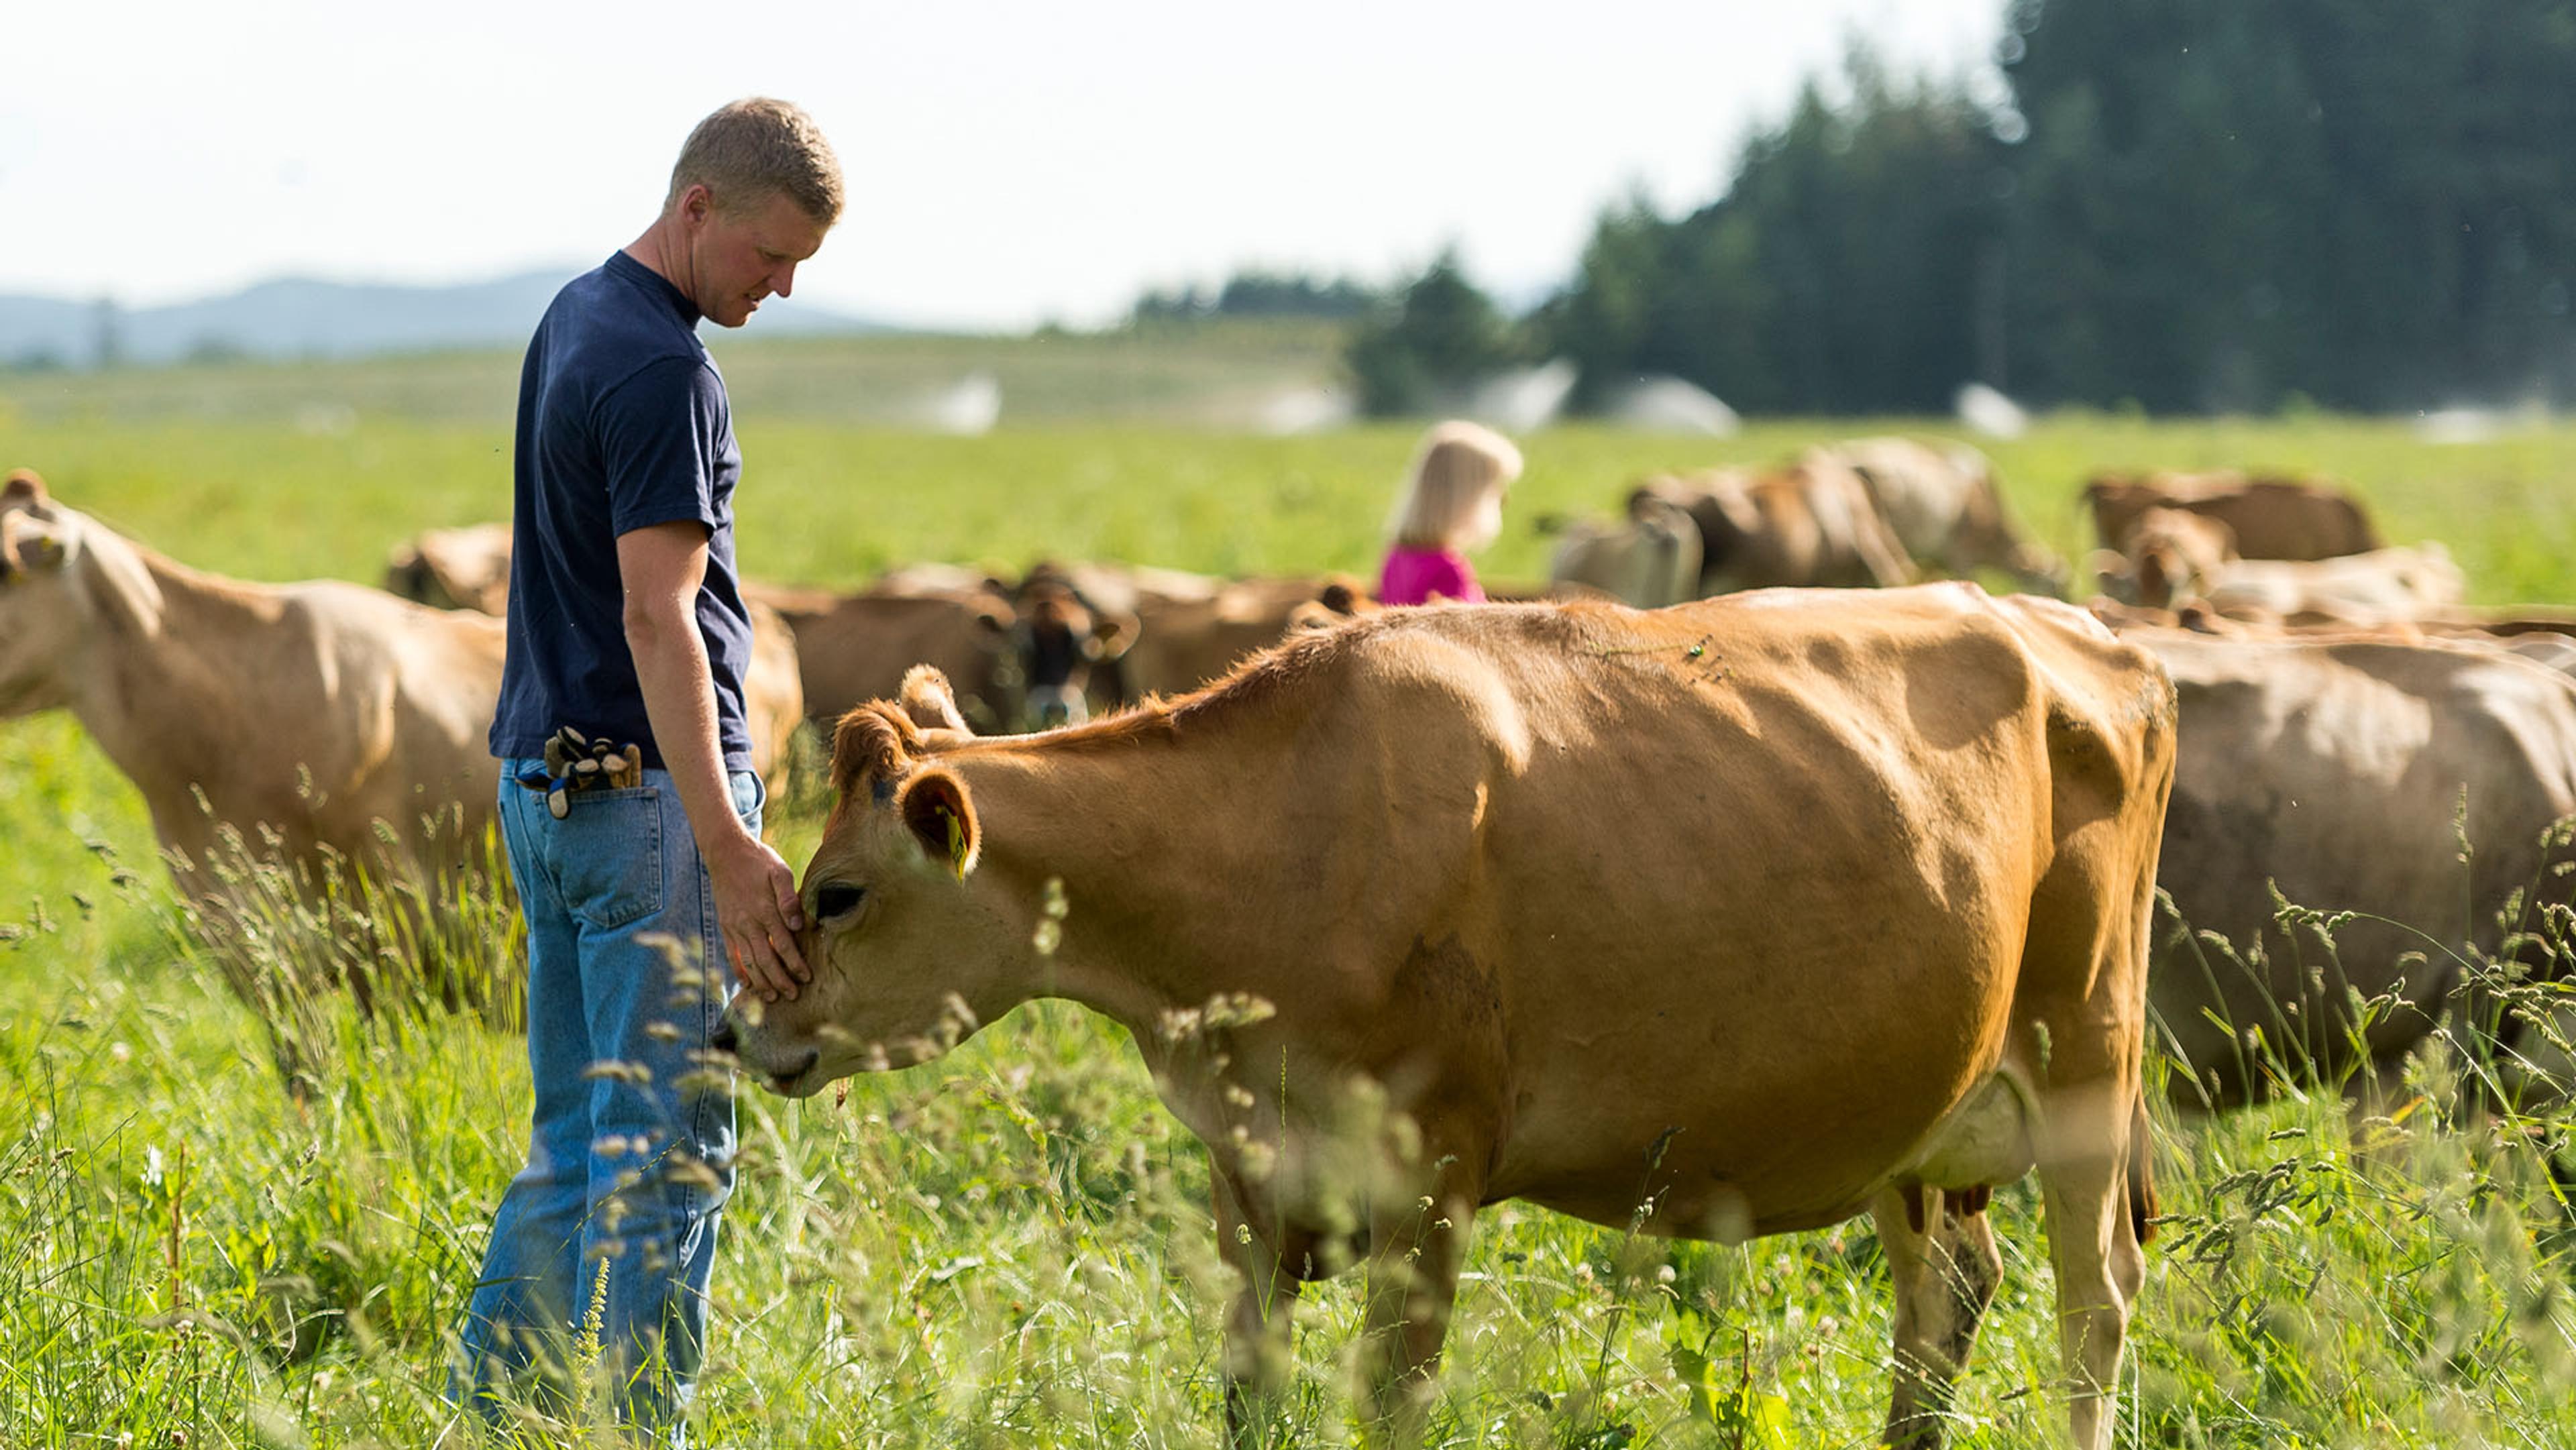 A farmer standing in the pasture with some cows.